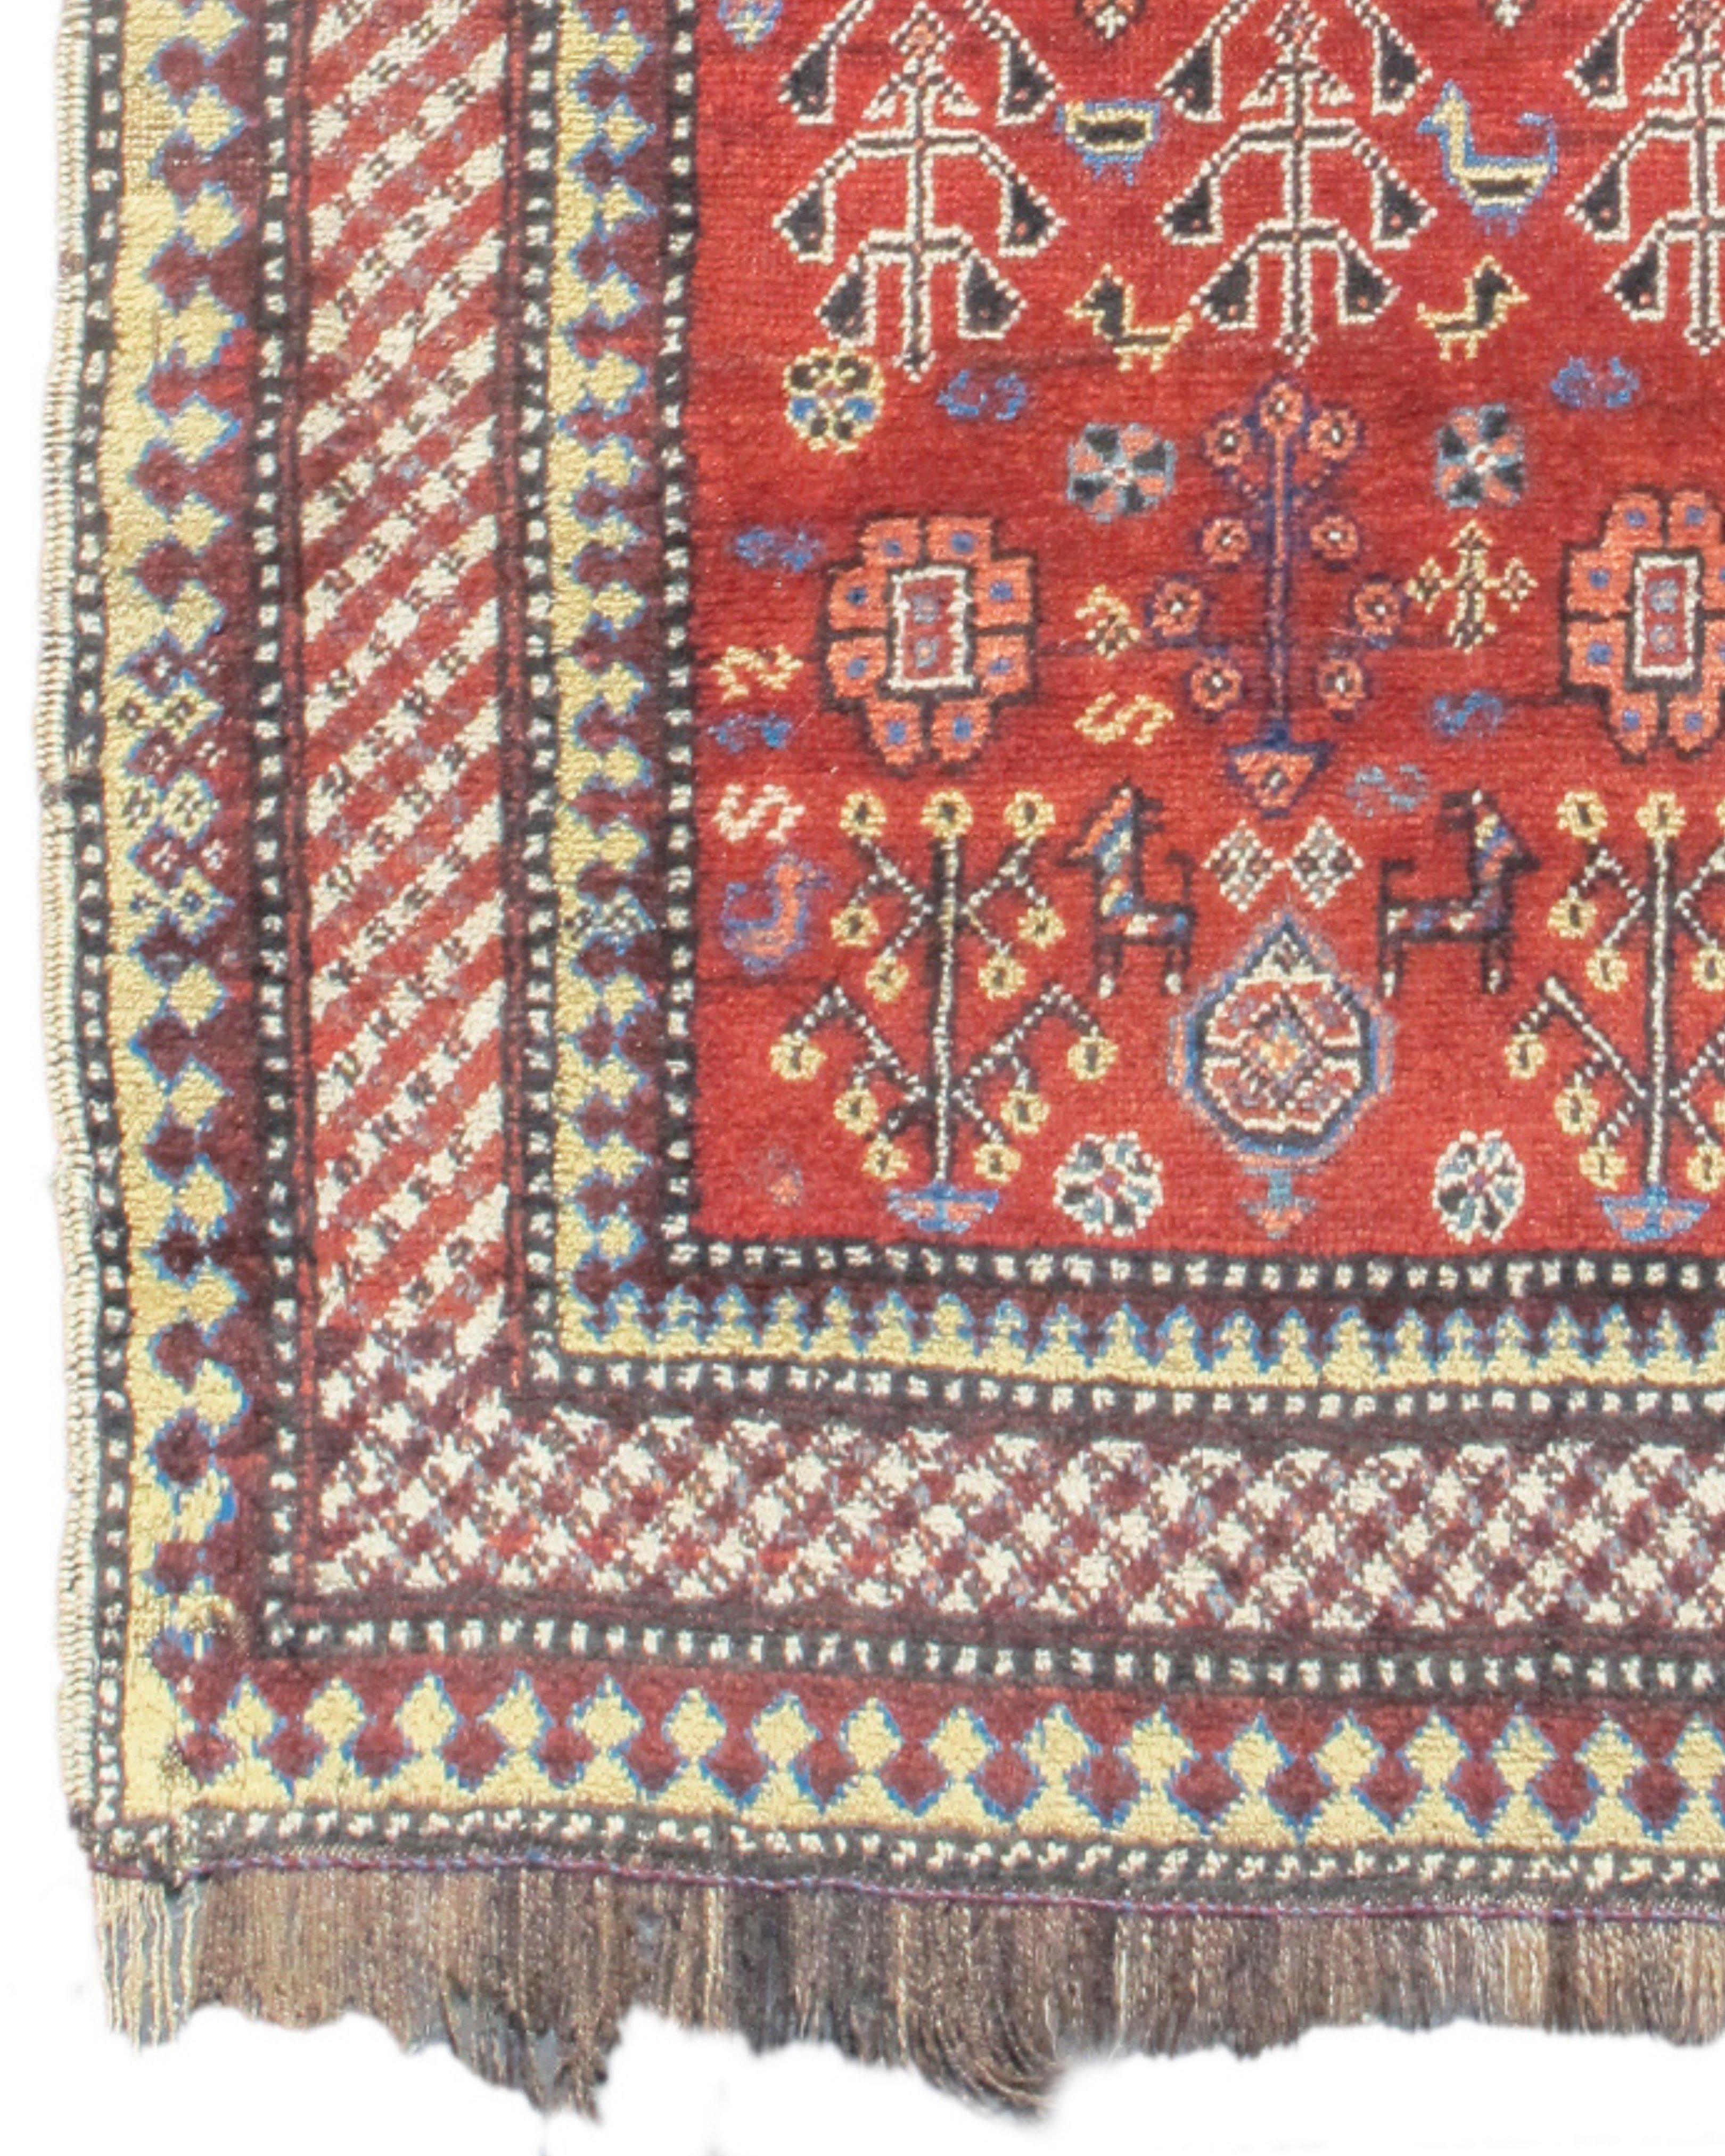 Hand-Knotted Antique Kurdish Rug, c. 1900 For Sale